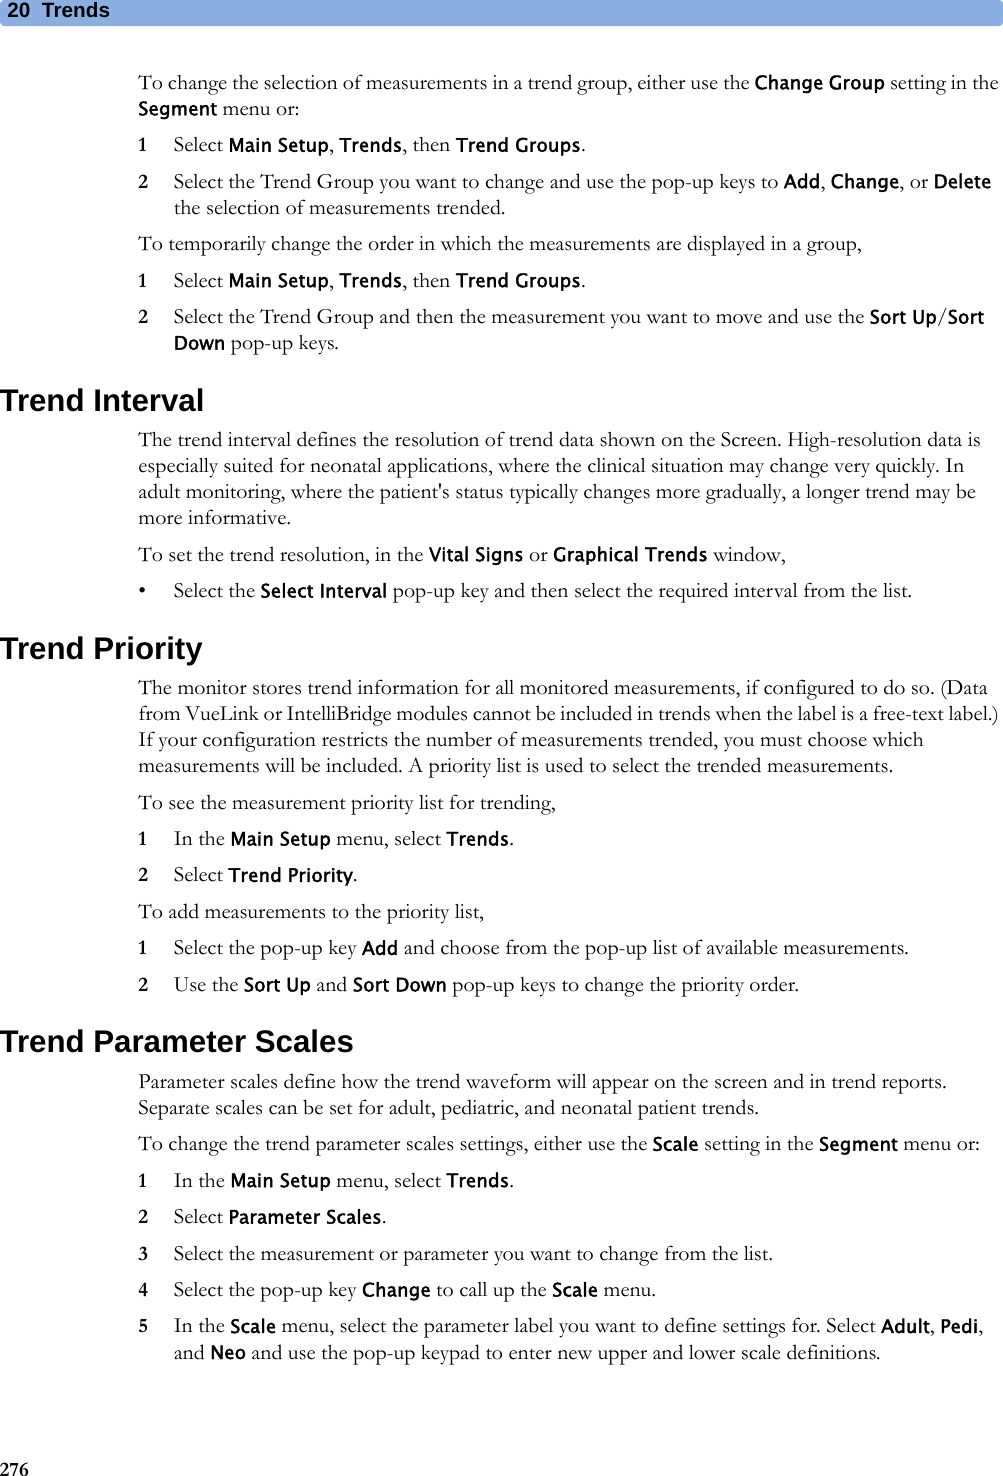 20 Trends276To change the selection of measurements in a trend group, either use the Change Group setting in the Segment menu or:1Select Main Setup, Trends, then Trend Groups.2Select the Trend Group you want to change and use the pop-up keys to Add, Change, or Delete the selection of measurements trended.To temporarily change the order in which the measurements are displayed in a group,1Select Main Setup, Trends, then Trend Groups.2Select the Trend Group and then the measurement you want to move and use the Sort Up/Sort Down pop-up keys.Trend IntervalThe trend interval defines the resolution of trend data shown on the Screen. High-resolution data is especially suited for neonatal applications, where the clinical situation may change very quickly. In adult monitoring, where the patient&apos;s status typically changes more gradually, a longer trend may be more informative.To set the trend resolution, in the Vital Signs or Graphical Trends window,• Select the Select Interval pop-up key and then select the required interval from the list.Trend PriorityThe monitor stores trend information for all monitored measurements, if configured to do so. (Data from VueLink or IntelliBridge modules cannot be included in trends when the label is a free-text label.) If your configuration restricts the number of measurements trended, you must choose which measurements will be included. A priority list is used to select the trended measurements.To see the measurement priority list for trending,1In the Main Setup menu, select Trends.2Select Trend Priority.To add measurements to the priority list,1Select the pop-up key Add and choose from the pop-up list of available measurements.2Use the Sort Up and Sort Down pop-up keys to change the priority order.Trend Parameter ScalesParameter scales define how the trend waveform will appear on the screen and in trend reports. Separate scales can be set for adult, pediatric, and neonatal patient trends. To change the trend parameter scales settings, either use the Scale setting in the Segment menu or:1In the Main Setup menu, select Trends.2Select Parameter Scales.3Select the measurement or parameter you want to change from the list.4Select the pop-up key Change to call up the Scale menu.5In the Scale menu, select the parameter label you want to define settings for. Select Adult, Pedi, and Neo and use the pop-up keypad to enter new upper and lower scale definitions.